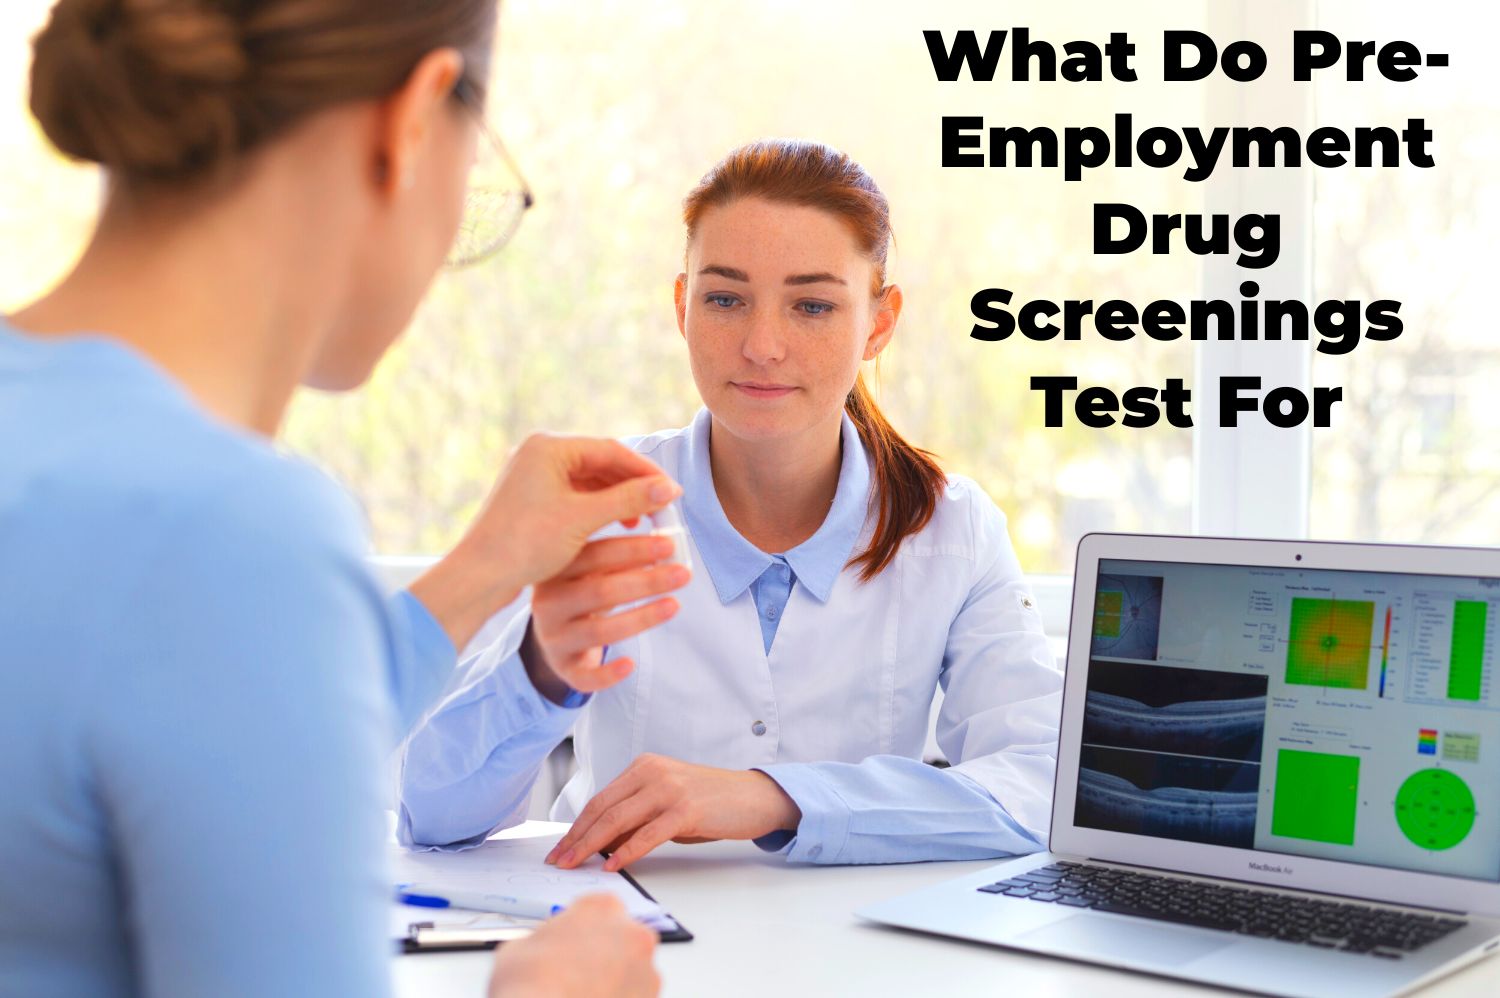 What Do Pre-Employment Drug Screenings Test For